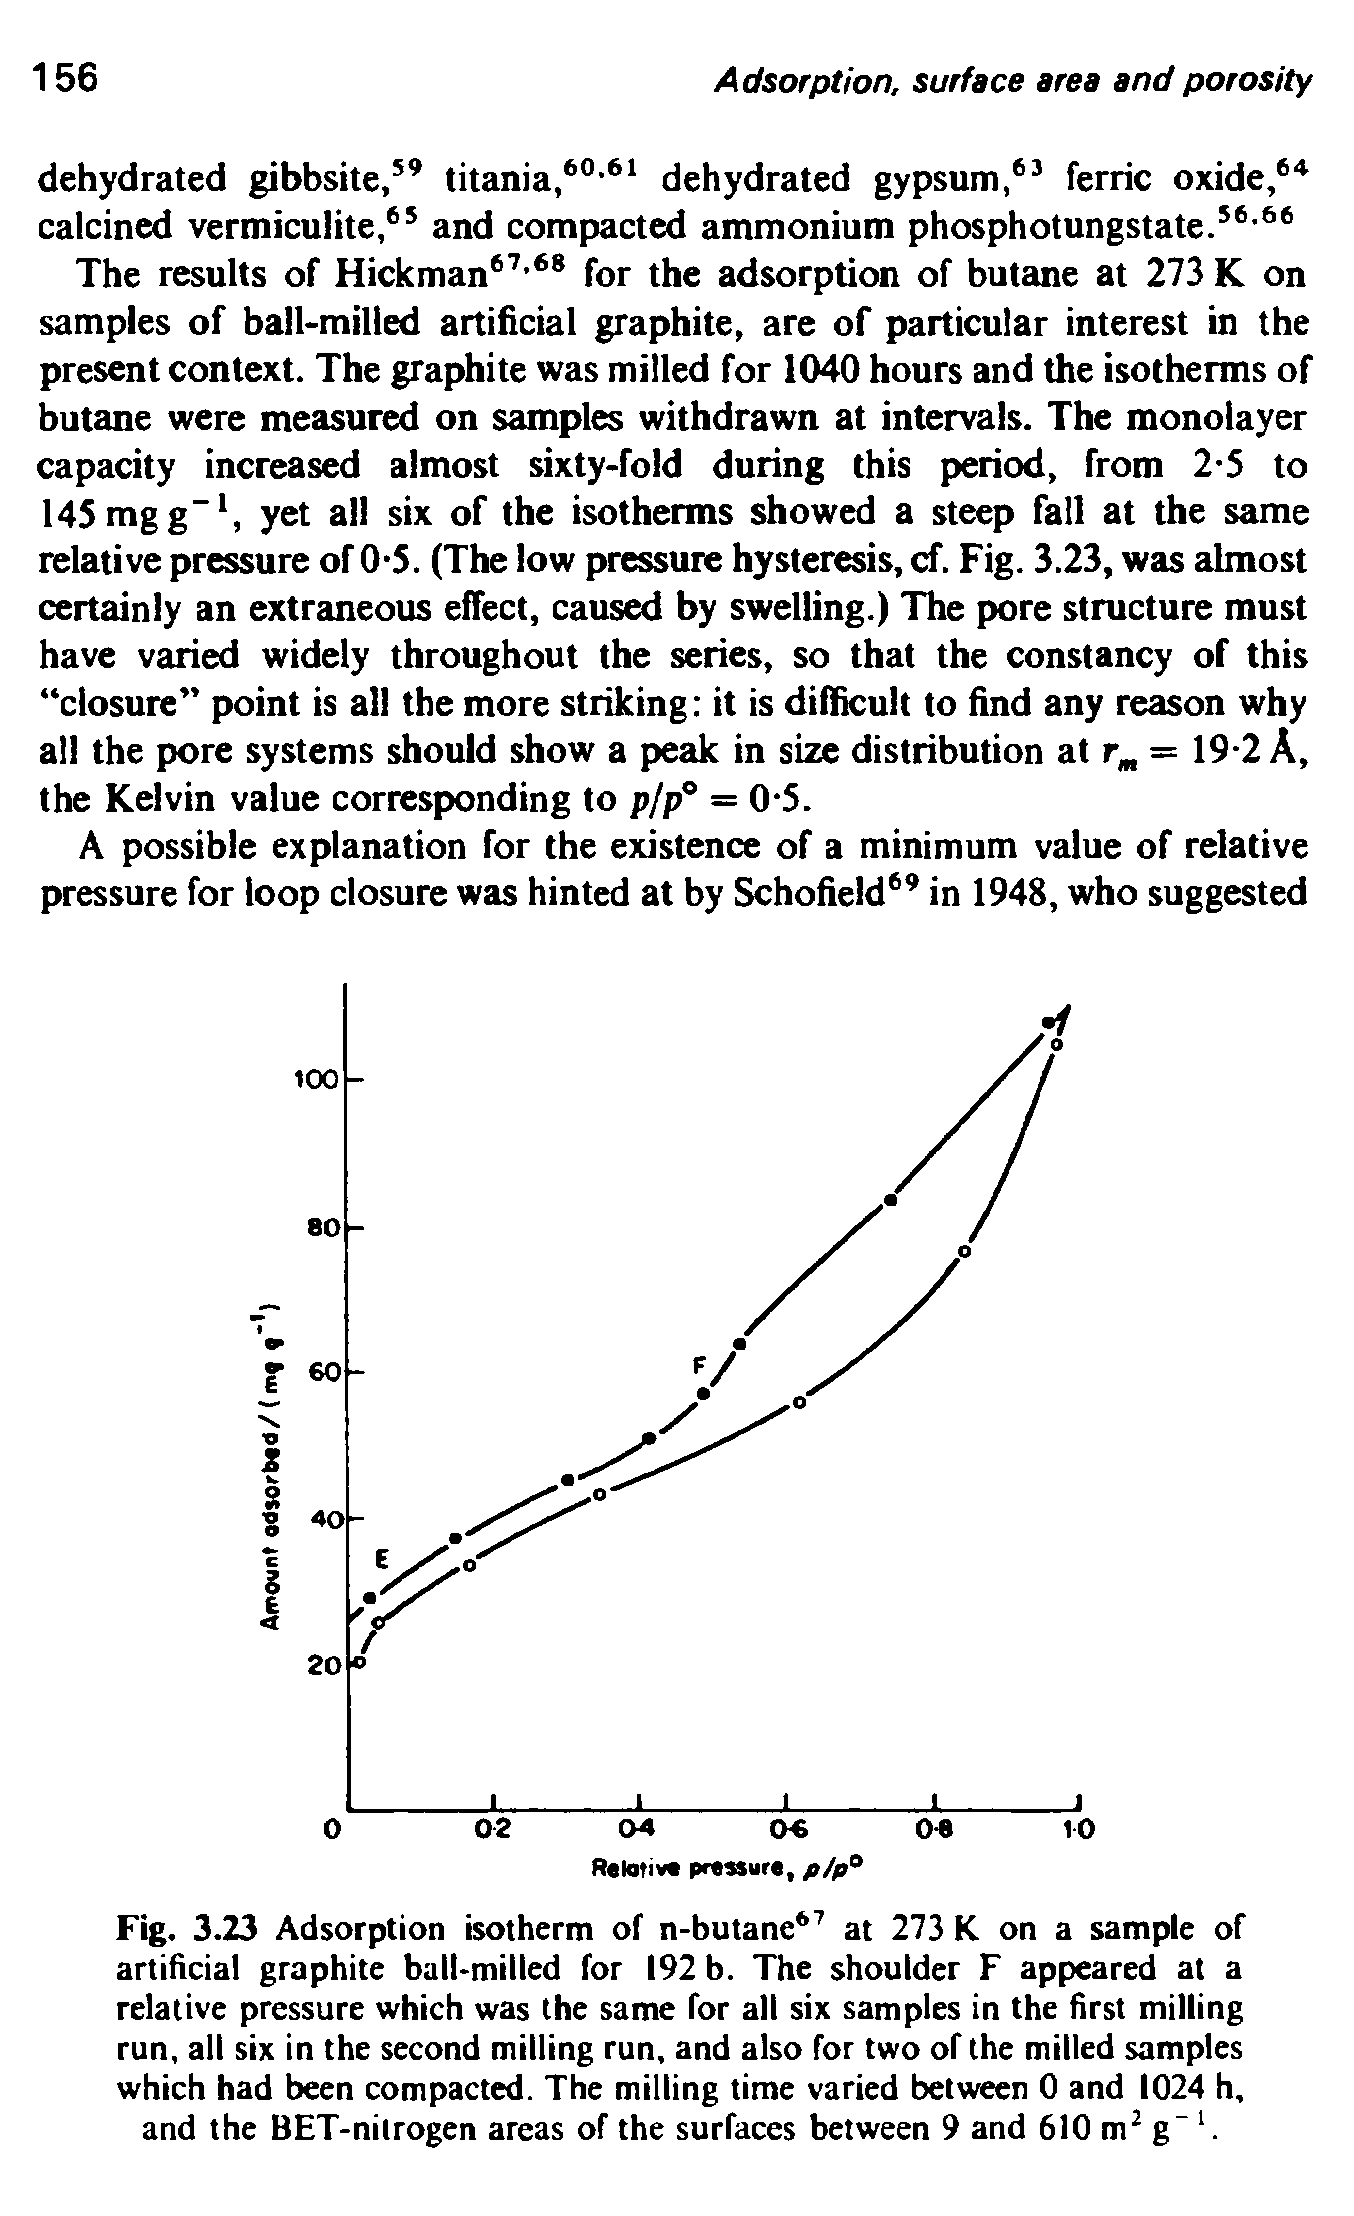 Fig. 3.Z3 Adsorption isotherm of n-butane at 273 K on a sample of artificial graphite ball-milled for 192 b. The shoulder F appeared at a relative pressure which was the same for all six samples in the first milling run, all six in the second milling run, and also for two of the milled samples which had been compacted. The milling time varied between 0 and 1024 h, and the BET-nilrogen areas of the surfaces between 9 and 610 m g ...